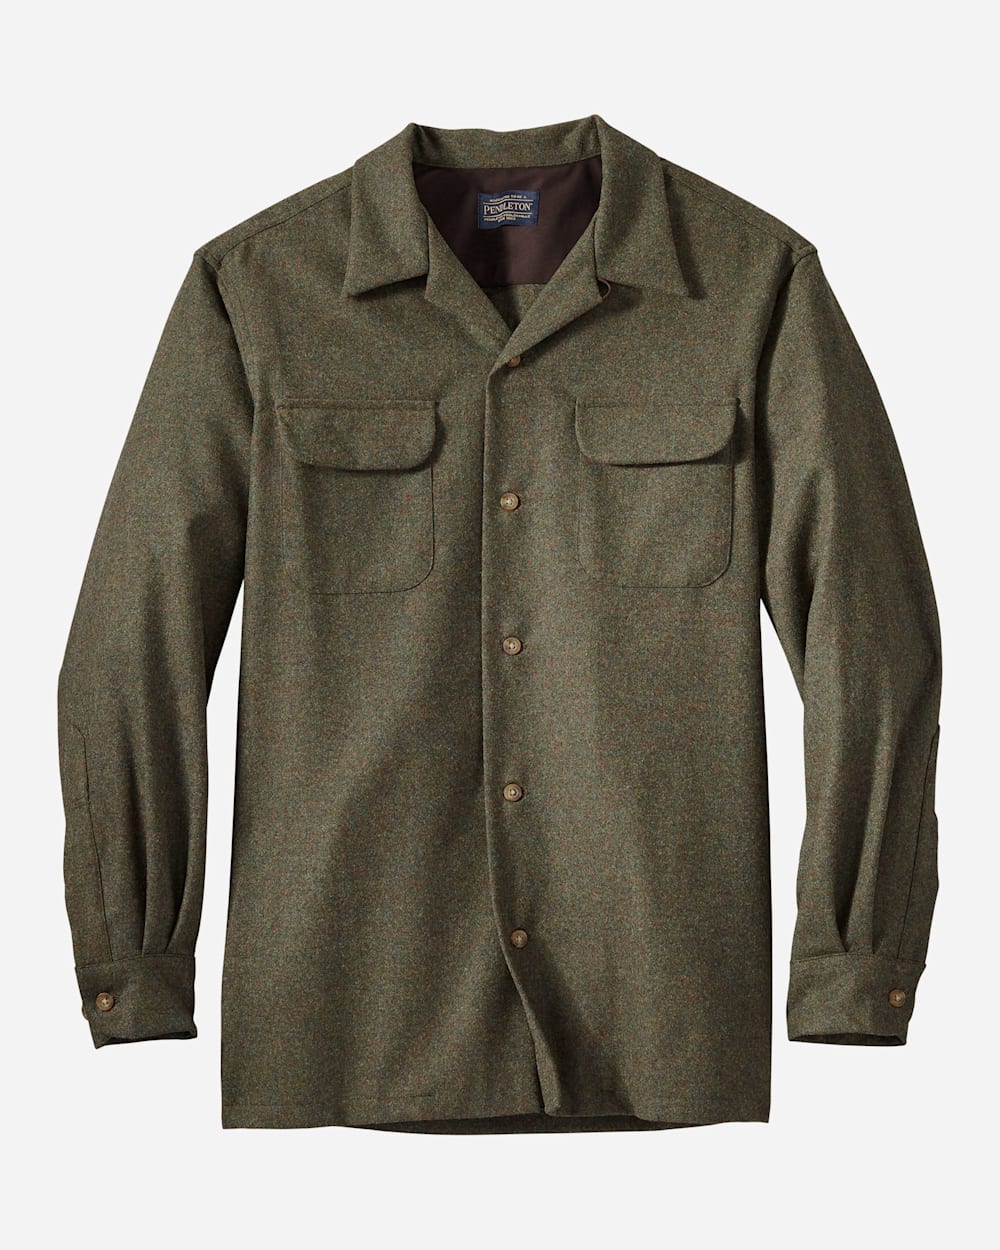 MEN'S BOARD SHIRT IN PEAT MOSS MIX SOLID image number 1